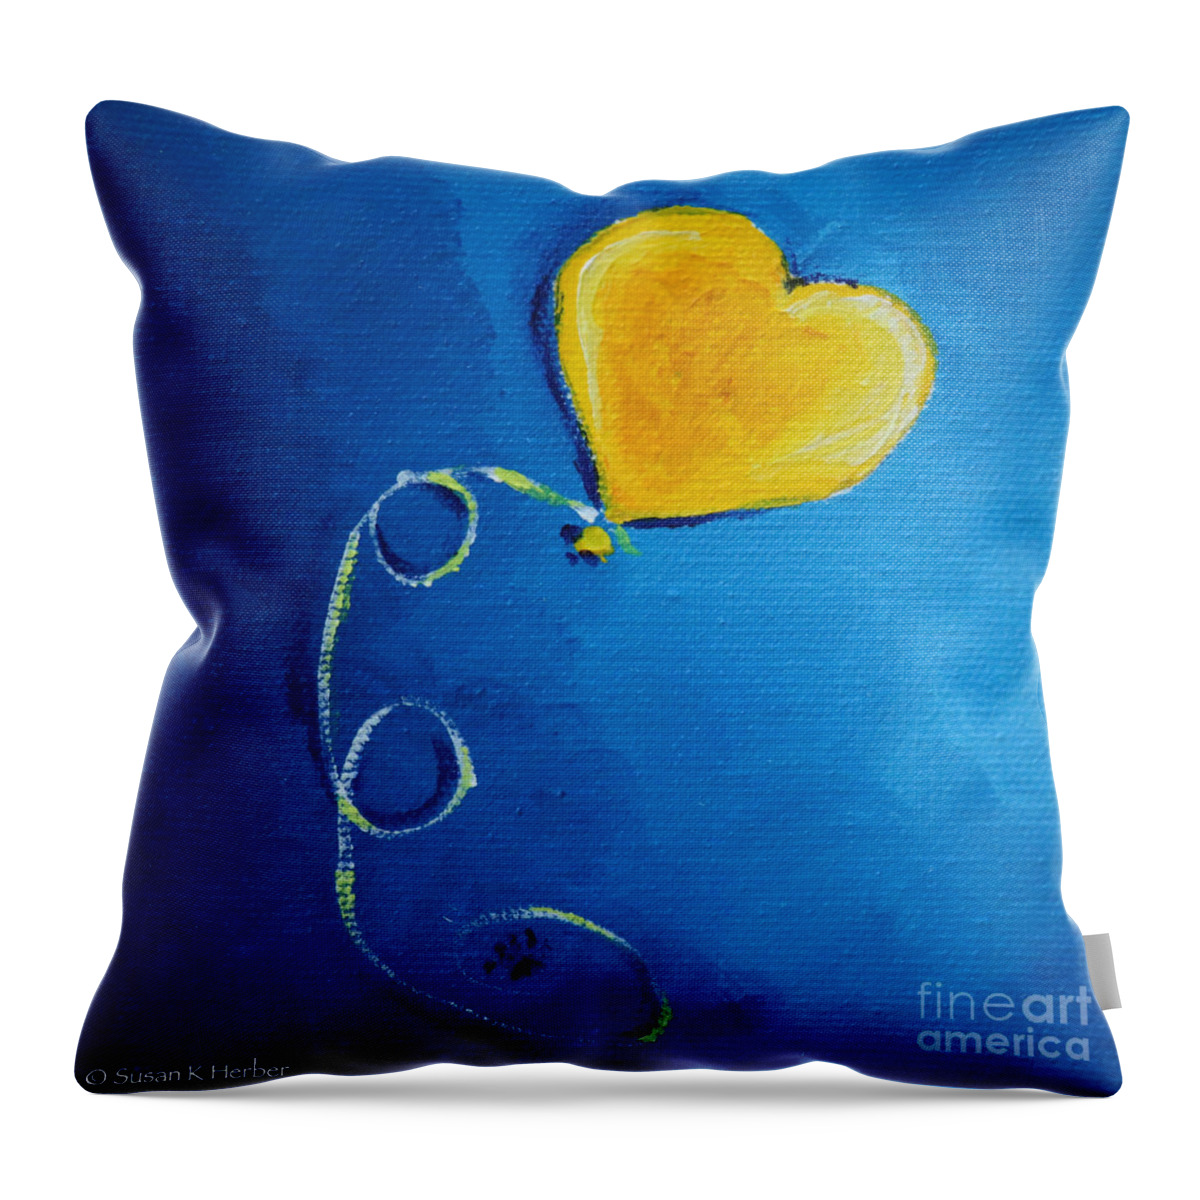 Heart Throw Pillow featuring the painting Floating Away by Susan Herber